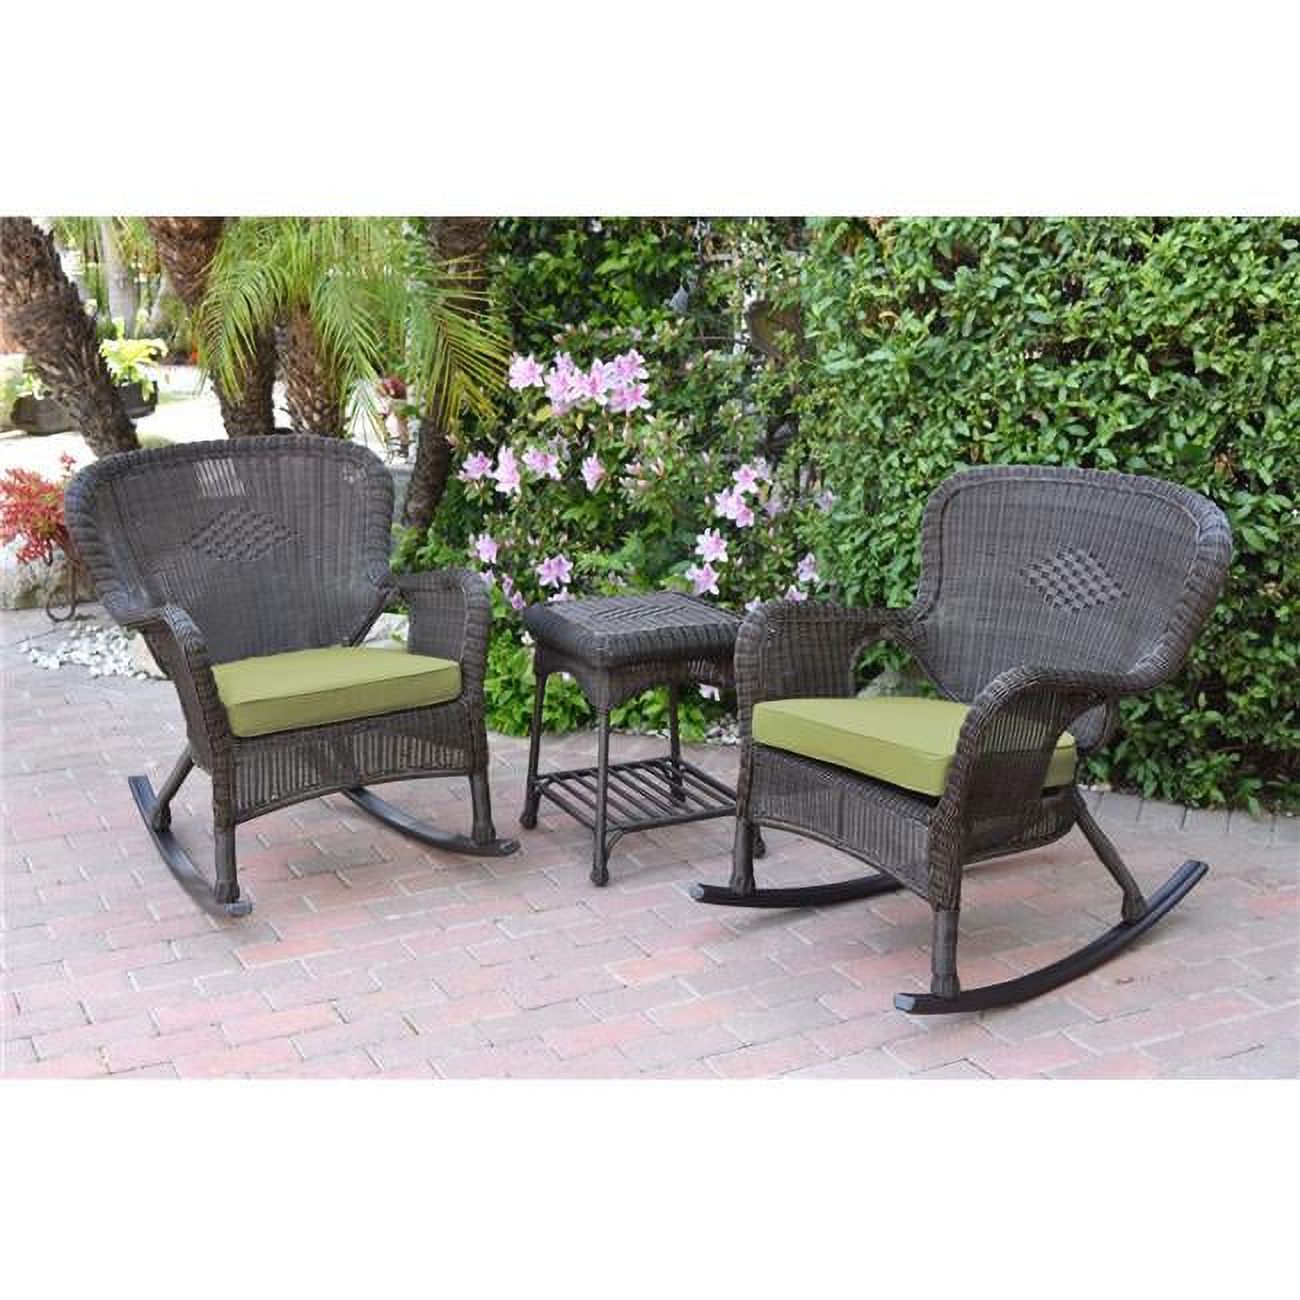 Jeco W00215-2-RCES029 Windsor Espresso Wicker Rocker Chair & End Table Set with Green Cushion - image 1 of 1